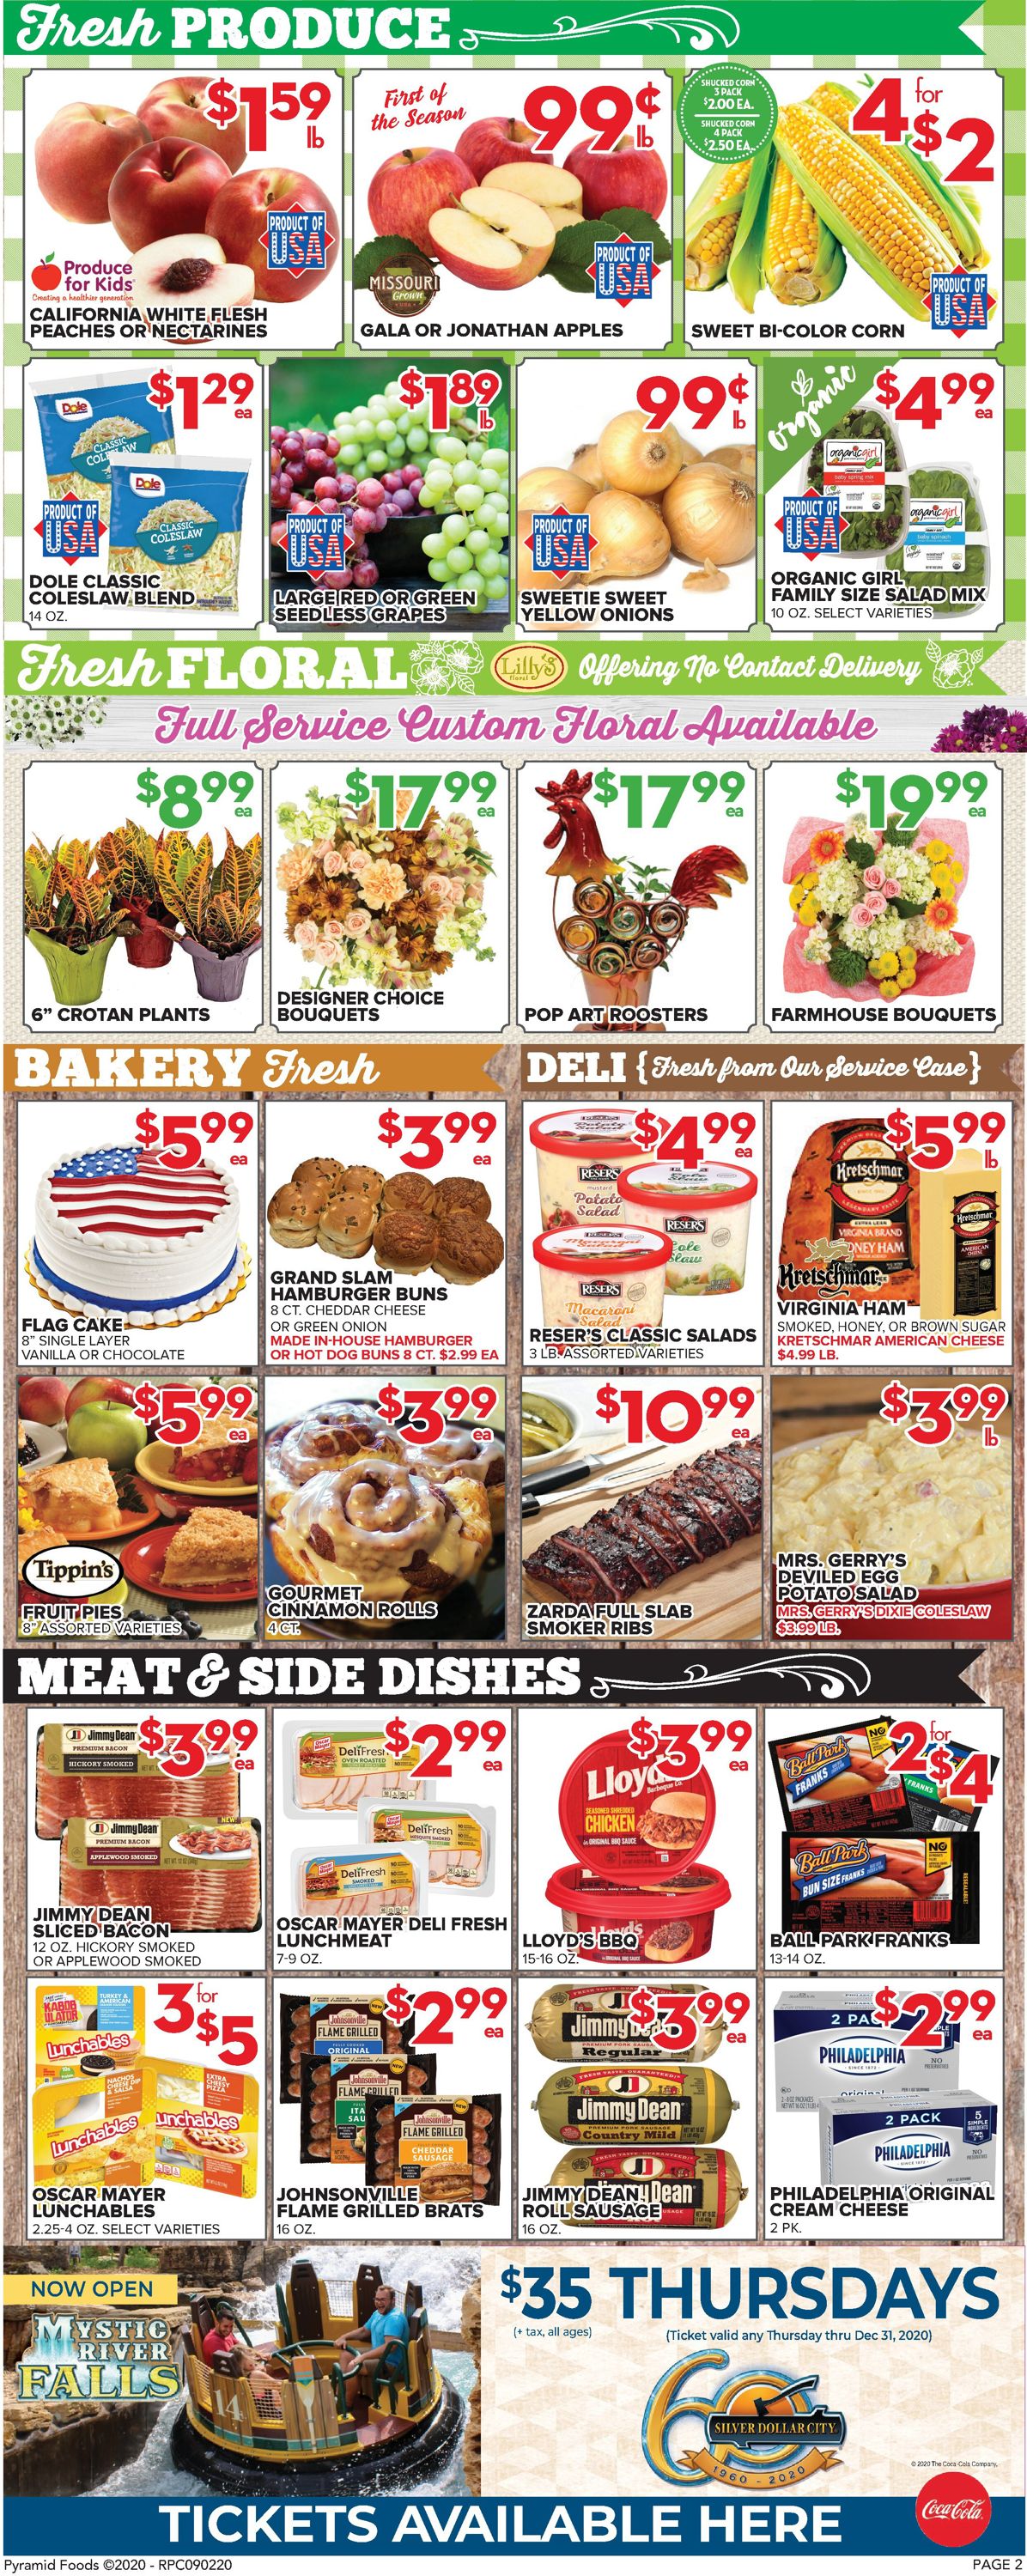 Price Cutter Weekly Ad Circular - valid 09/02-09/08/2020 (Page 2)